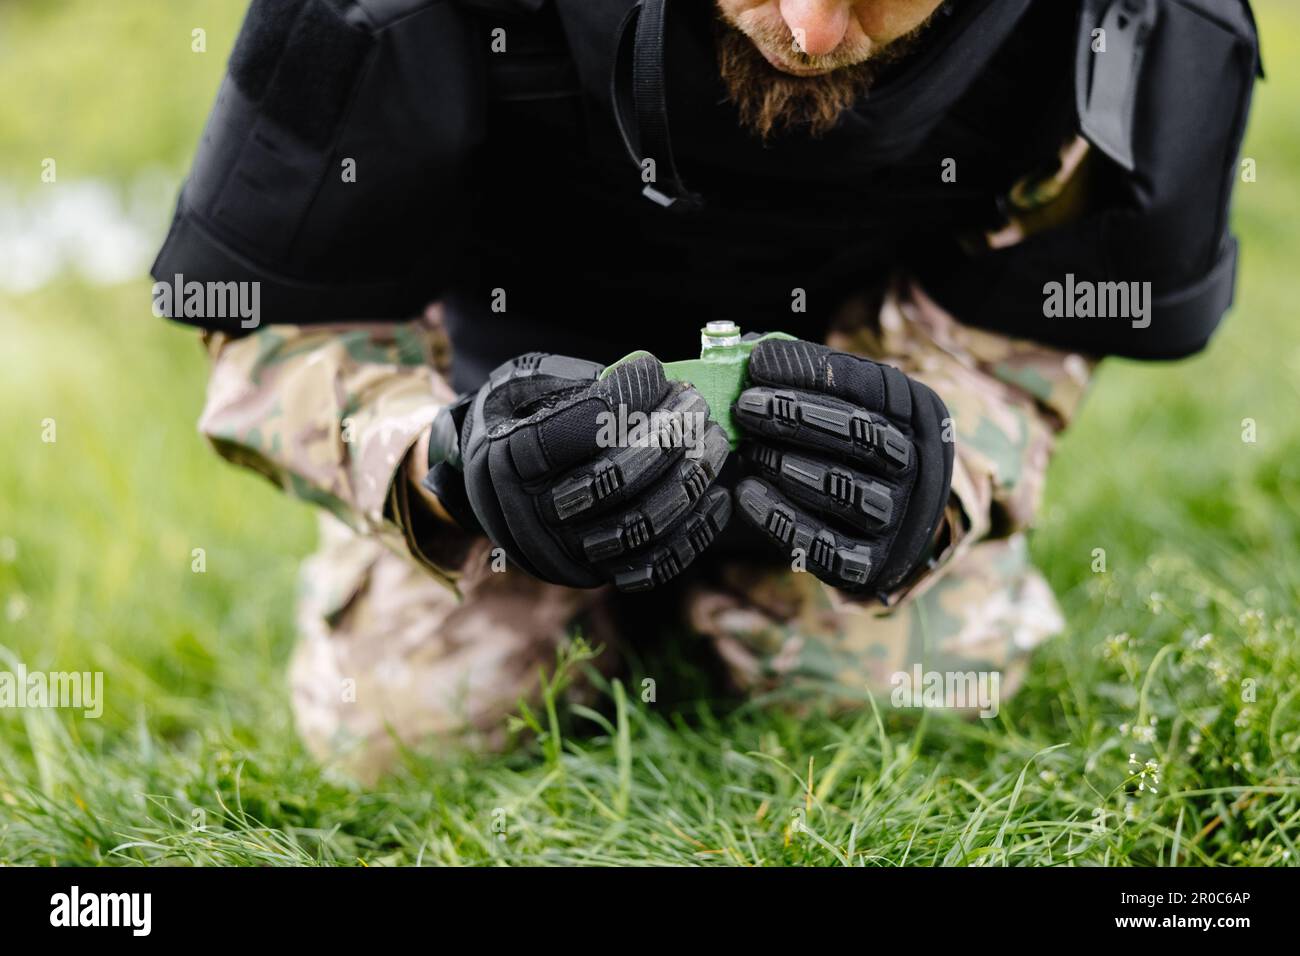 A man in a special suit works with a detector and found an explosive device. A man tries to neutralize high-explosive anti-personnel pressure mine. Stock Photo